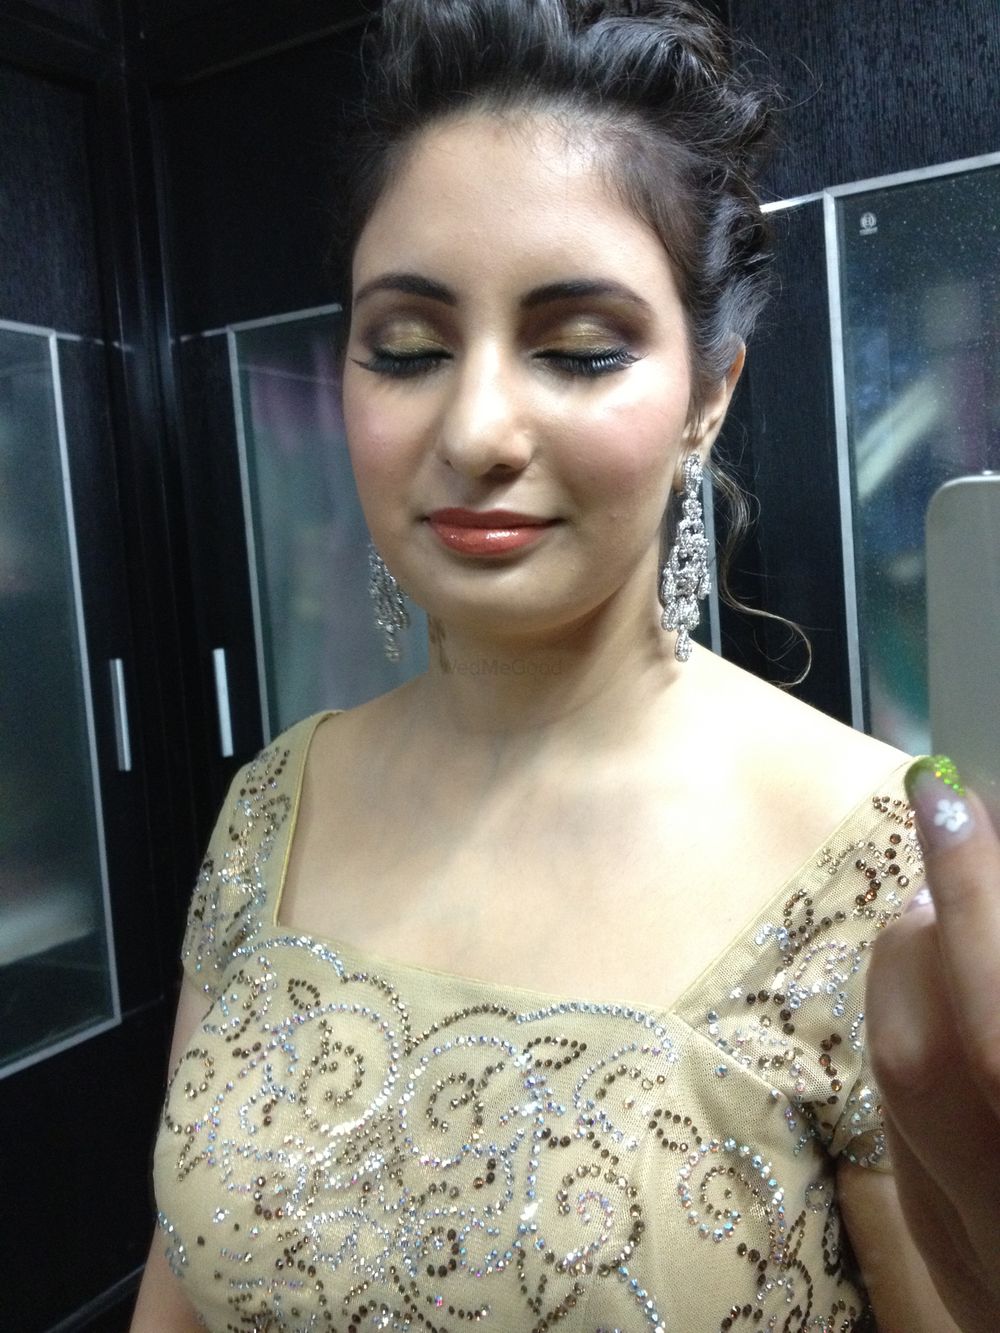 Photo From Party Makeup looks for Indian Functions_phone clicks - By Nivritti Chandra